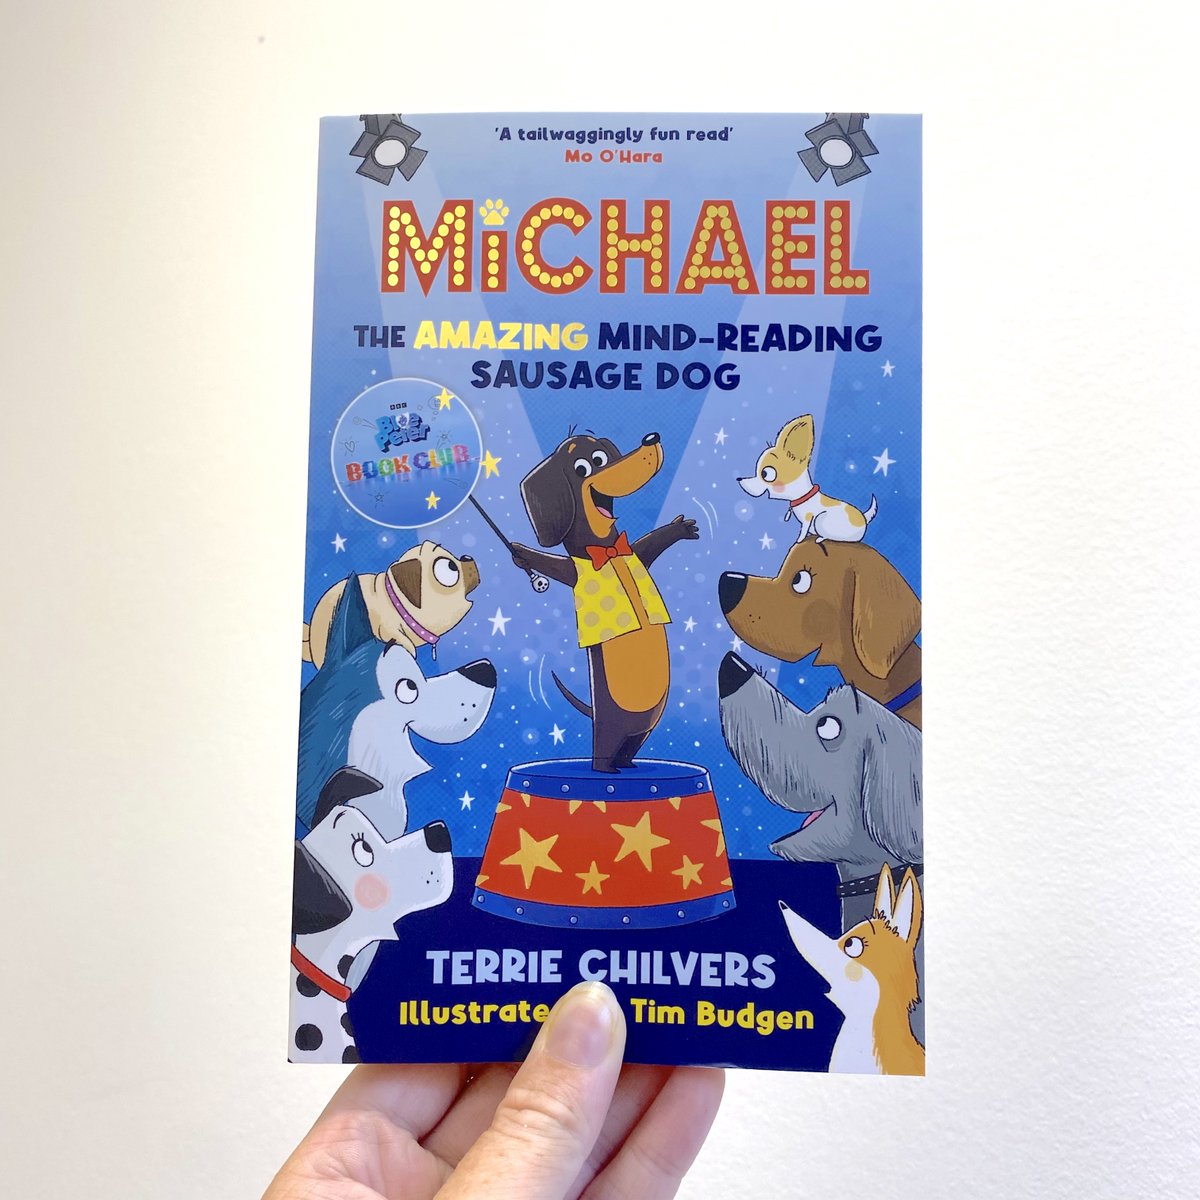 New copies of Michael the Amazing Mind-Reading Sausage Dog have arrived in the office ahead of it's feature on #BluePeterBookClub next month!

Look at our spangly new book club roundel 🌟

More info: bit.ly/Michael-Blue-P…